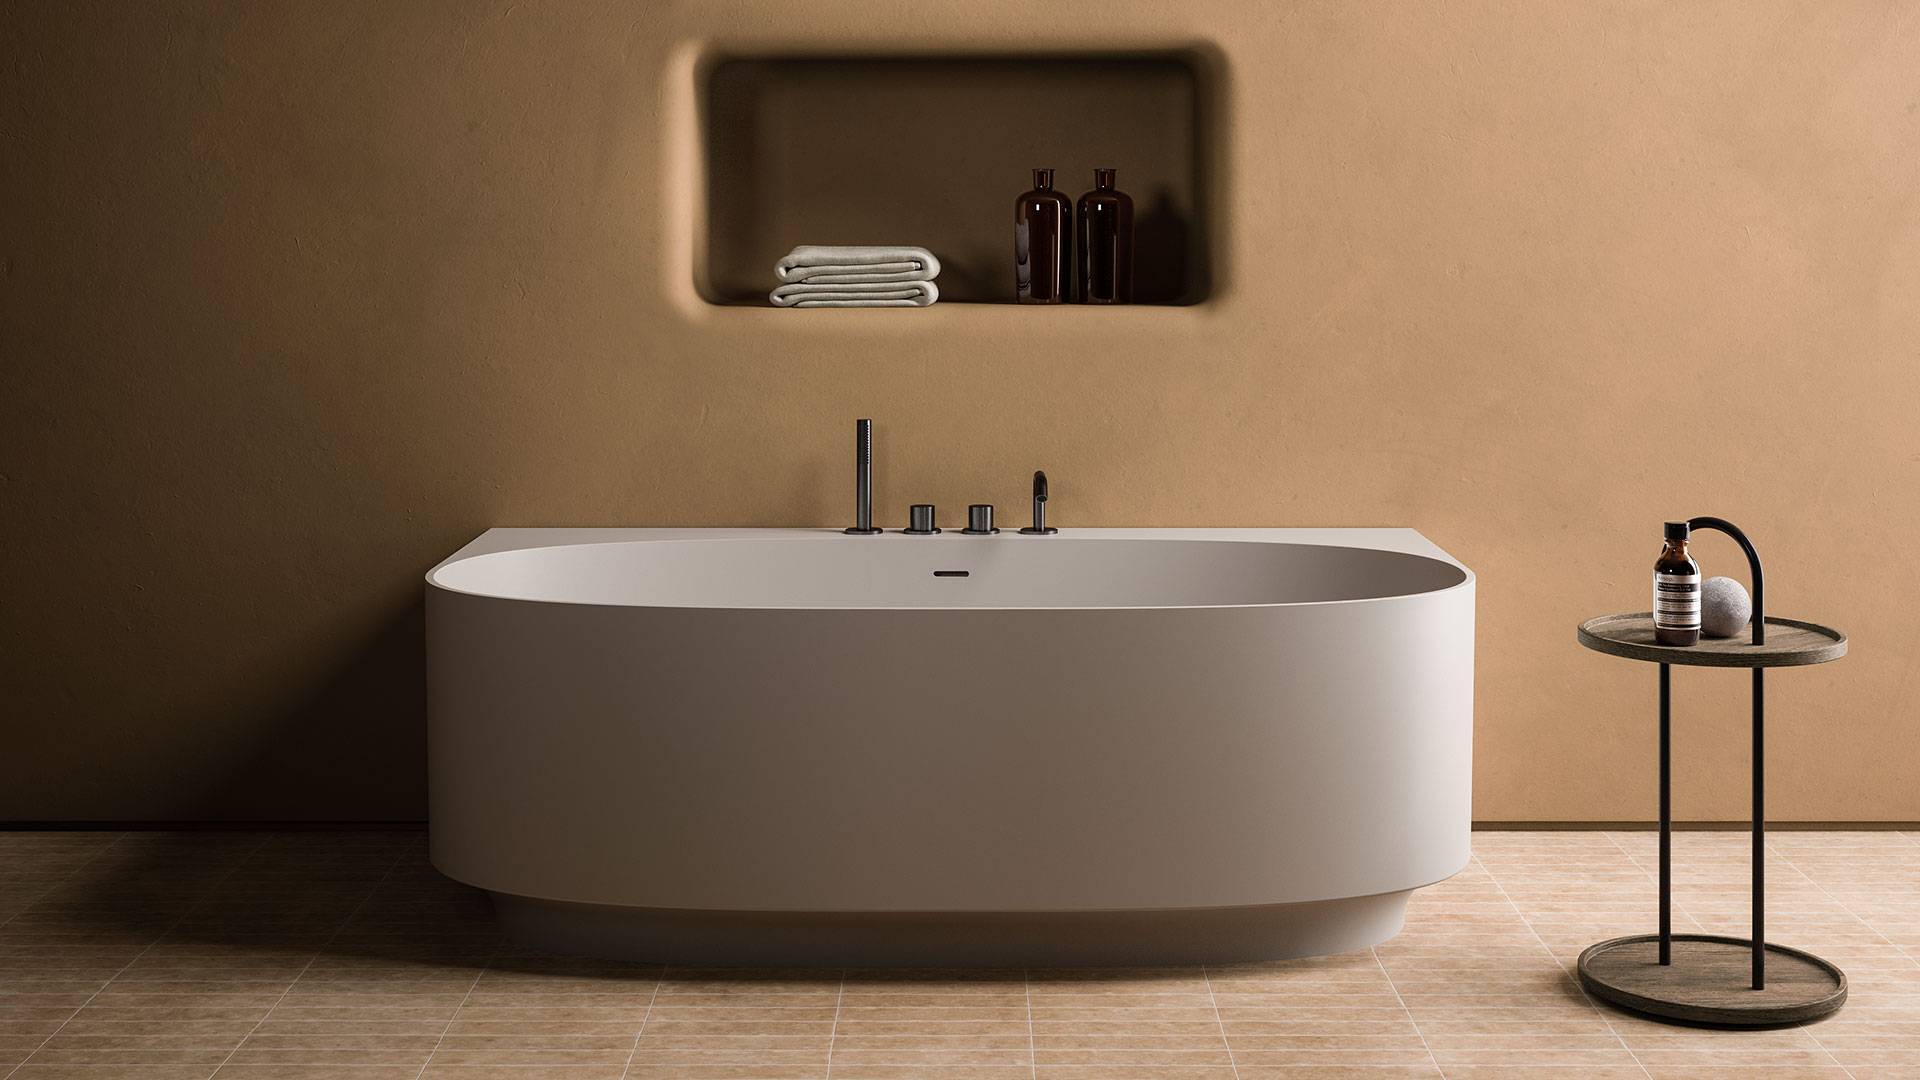 Arc160 wall mounted bathtub in UHS Colour Arena Grey 195